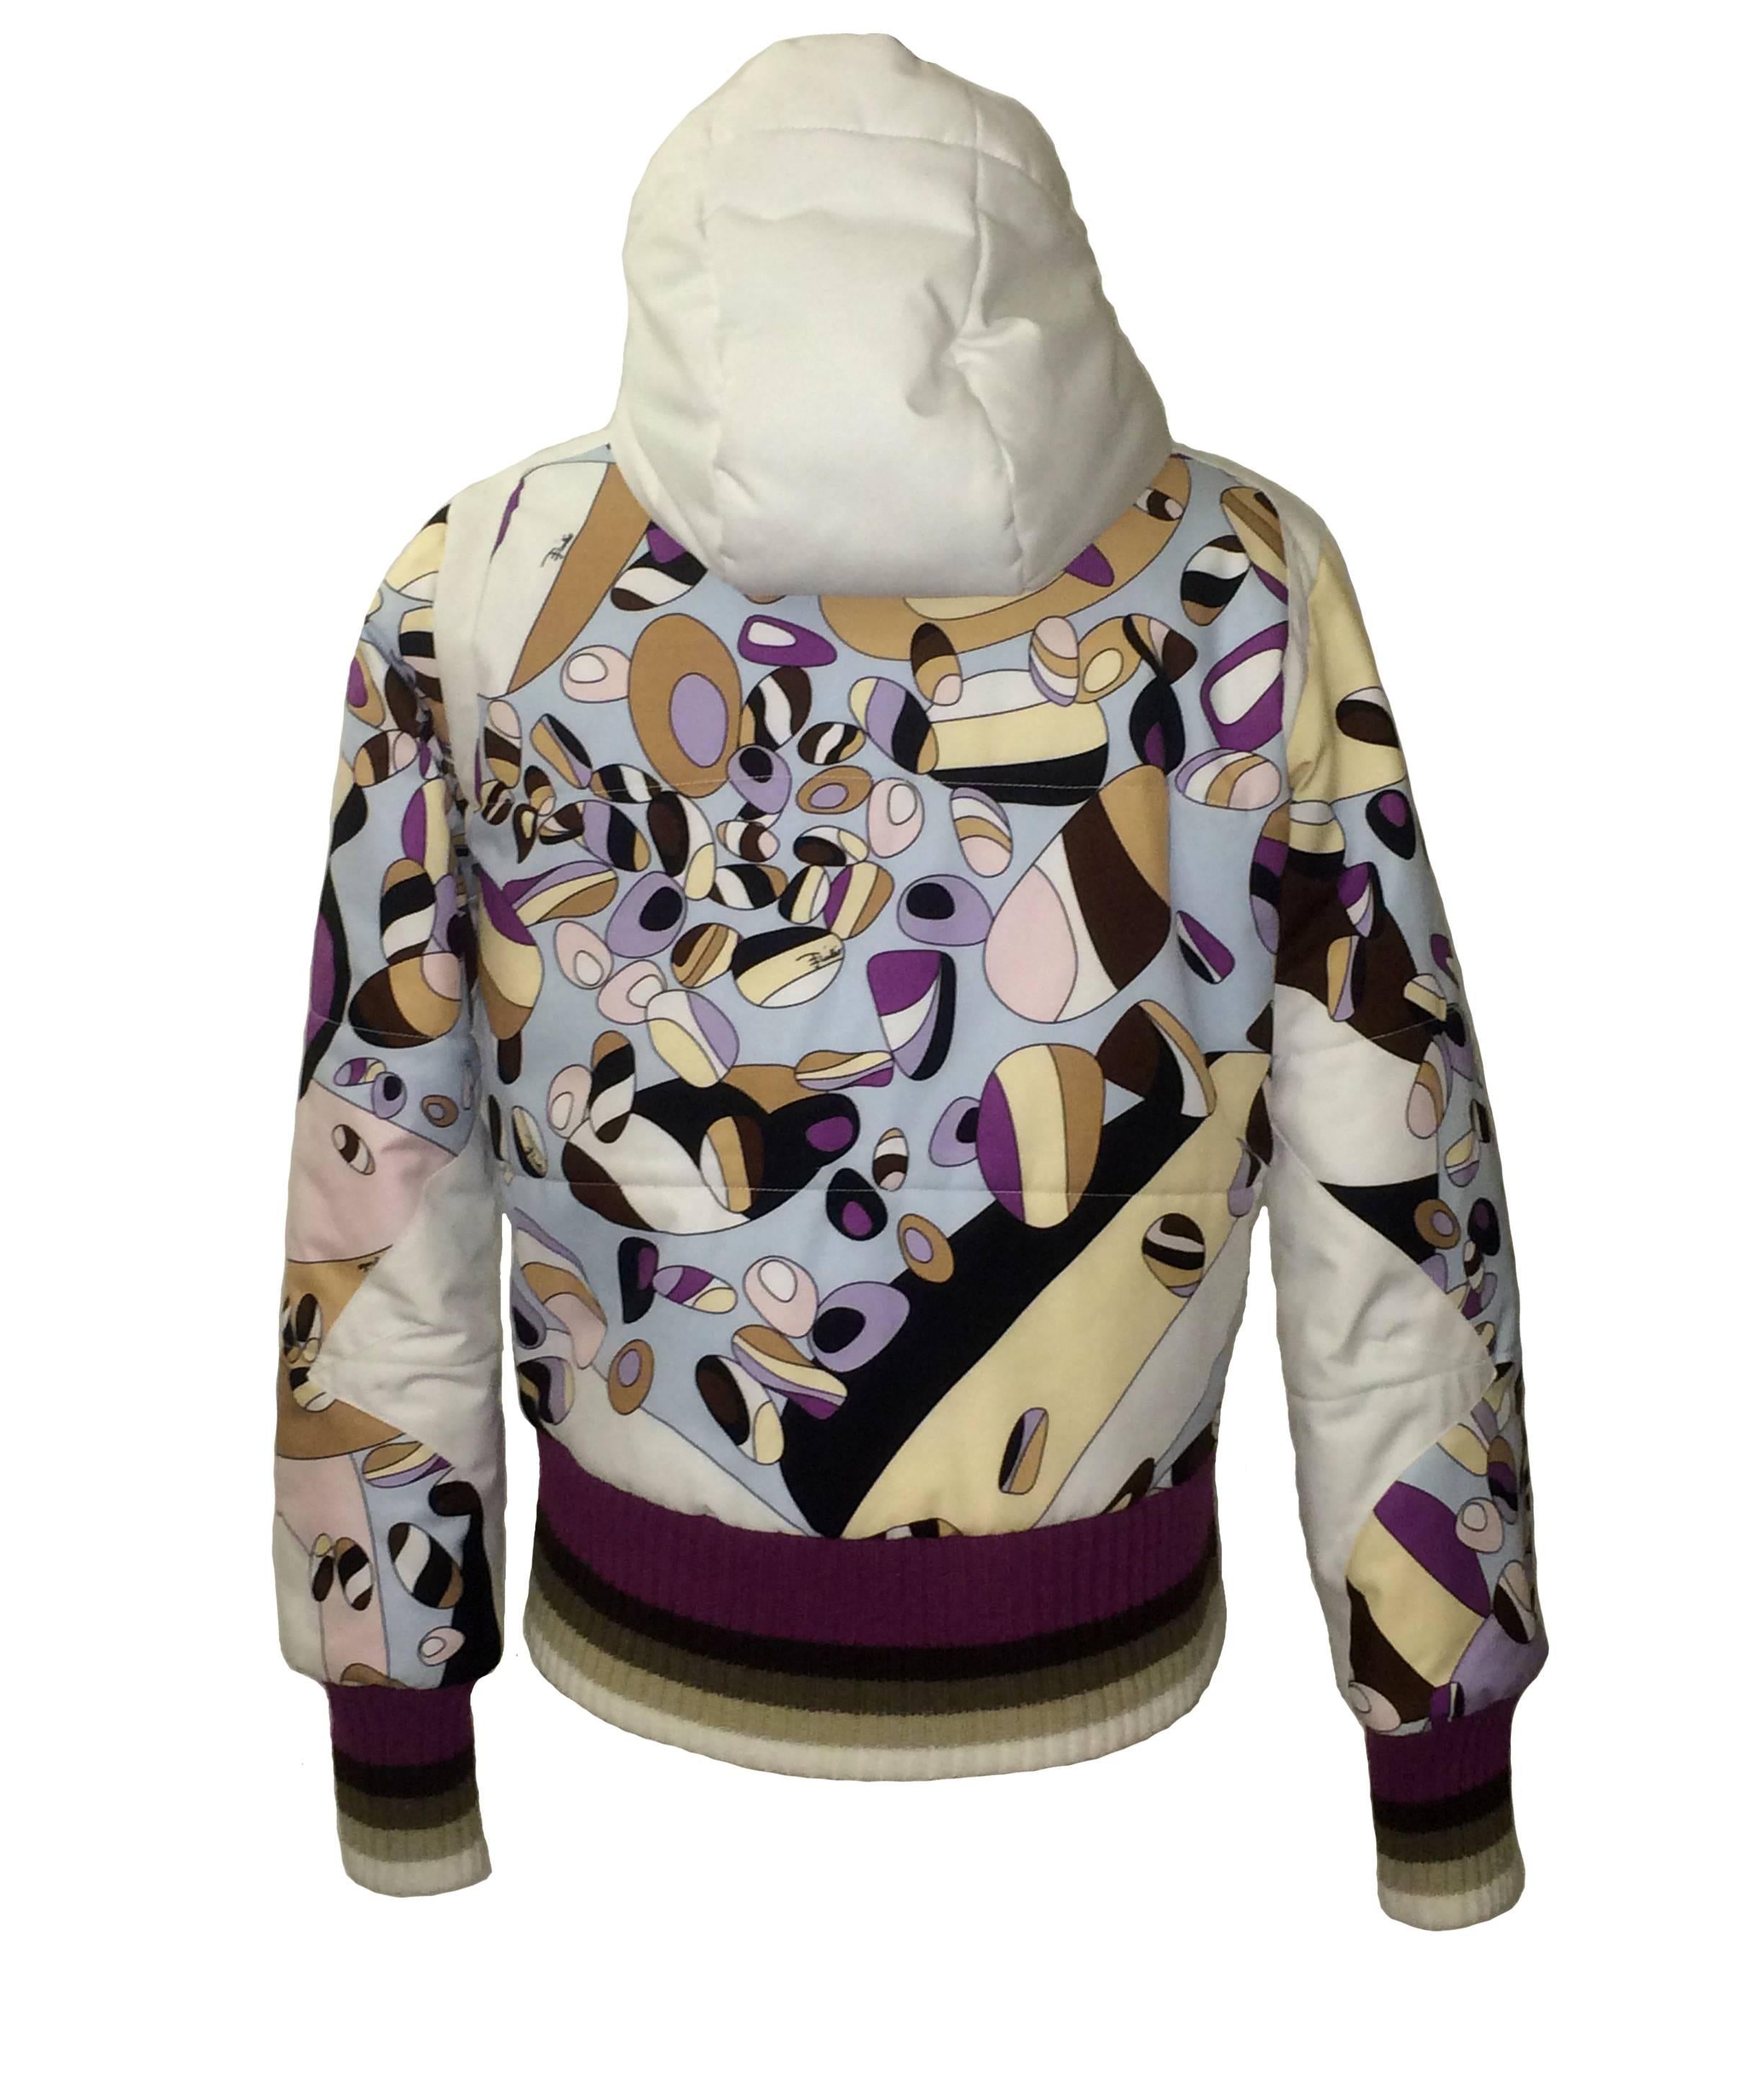 Emilio Pucci for Rossignol Pure Mountain Company hooded ski jacket in white, violet, tan, and pink Pucci print. Zippered pockets at front and one at interior. 

Signed 'Pucci' at zipper hardware and 'Emilio' throughout print.

'Windstopper'